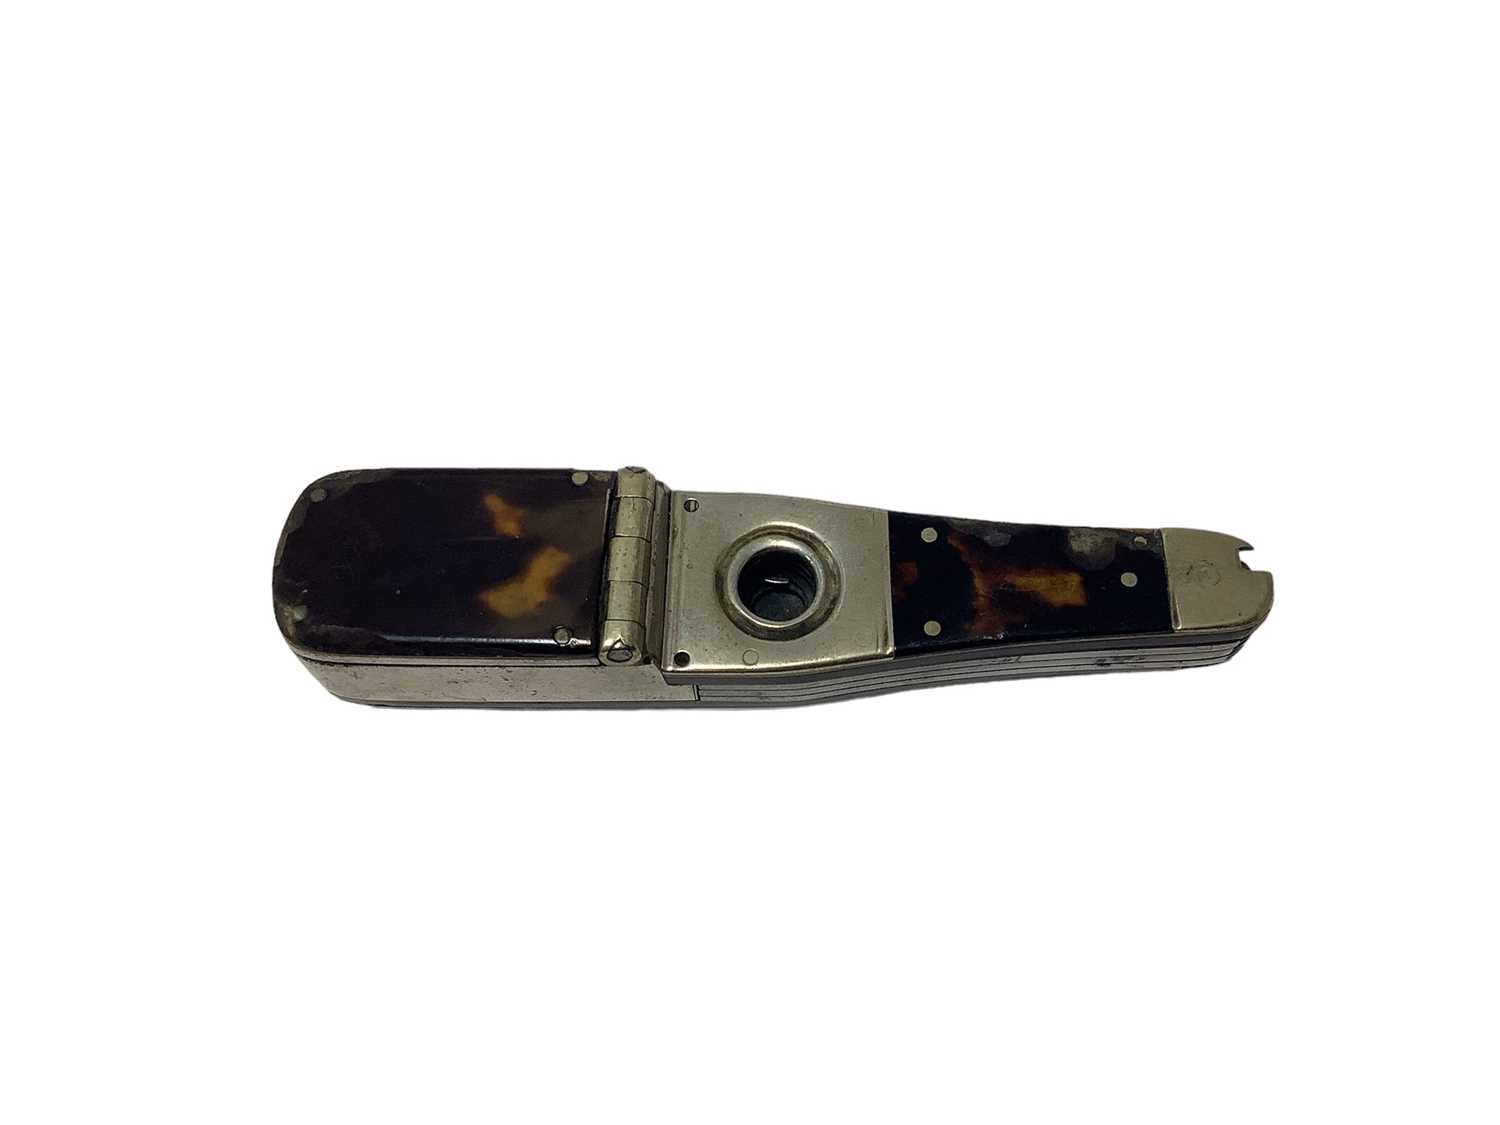 Lot 80 - Unusual Victorian combined Vesta case, cigar cutter and multiple bladed pen knife of bottle shape with nickel frame and tortoishell side plates, the blades marked Richards, Piccadilly 87mm long